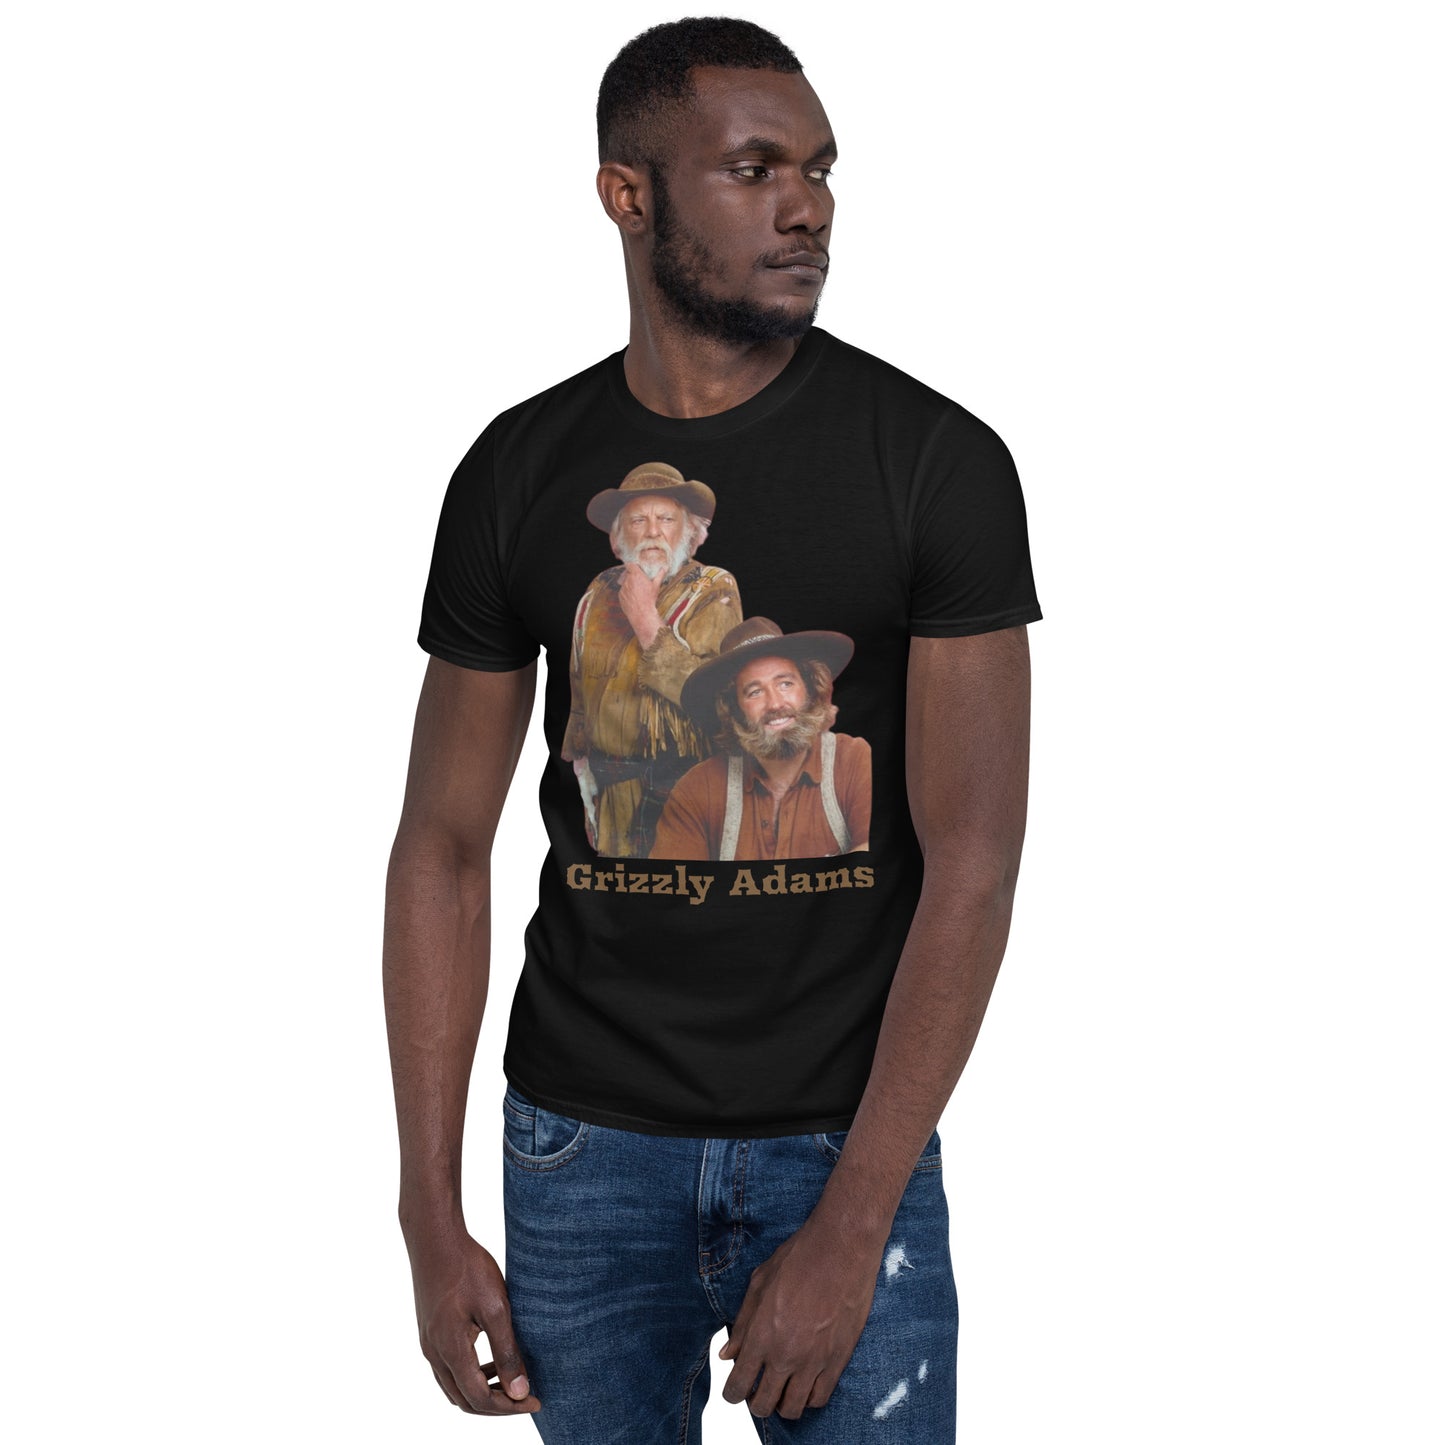 Grizzly Adams Short-Sleeve T-Shirt